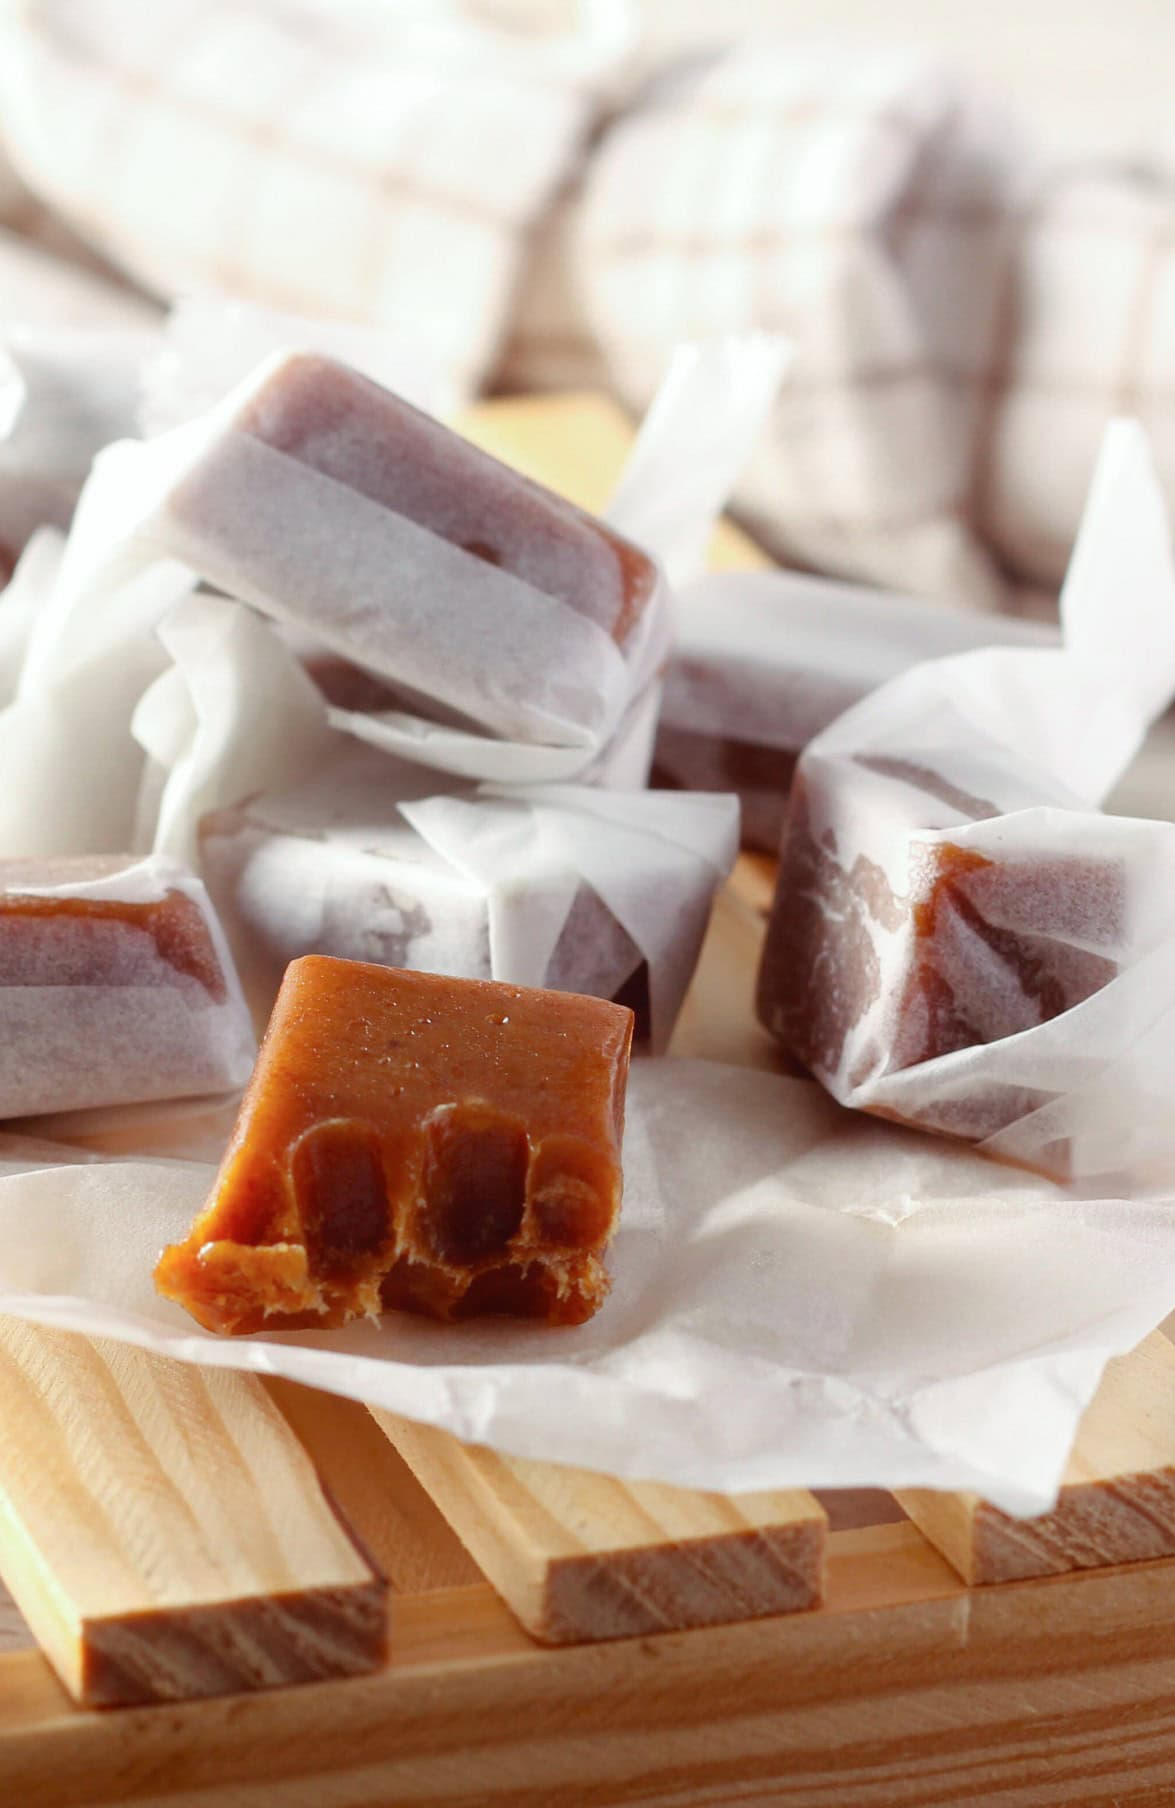 Homemade buttery dark brown sugar caramels wrapped in white paper, presented on a wooden tray with a checkered cloth in the background, on a wooden surface. The one in focus in the front is a closeup of an unwrapped caramel with a bite out of it.